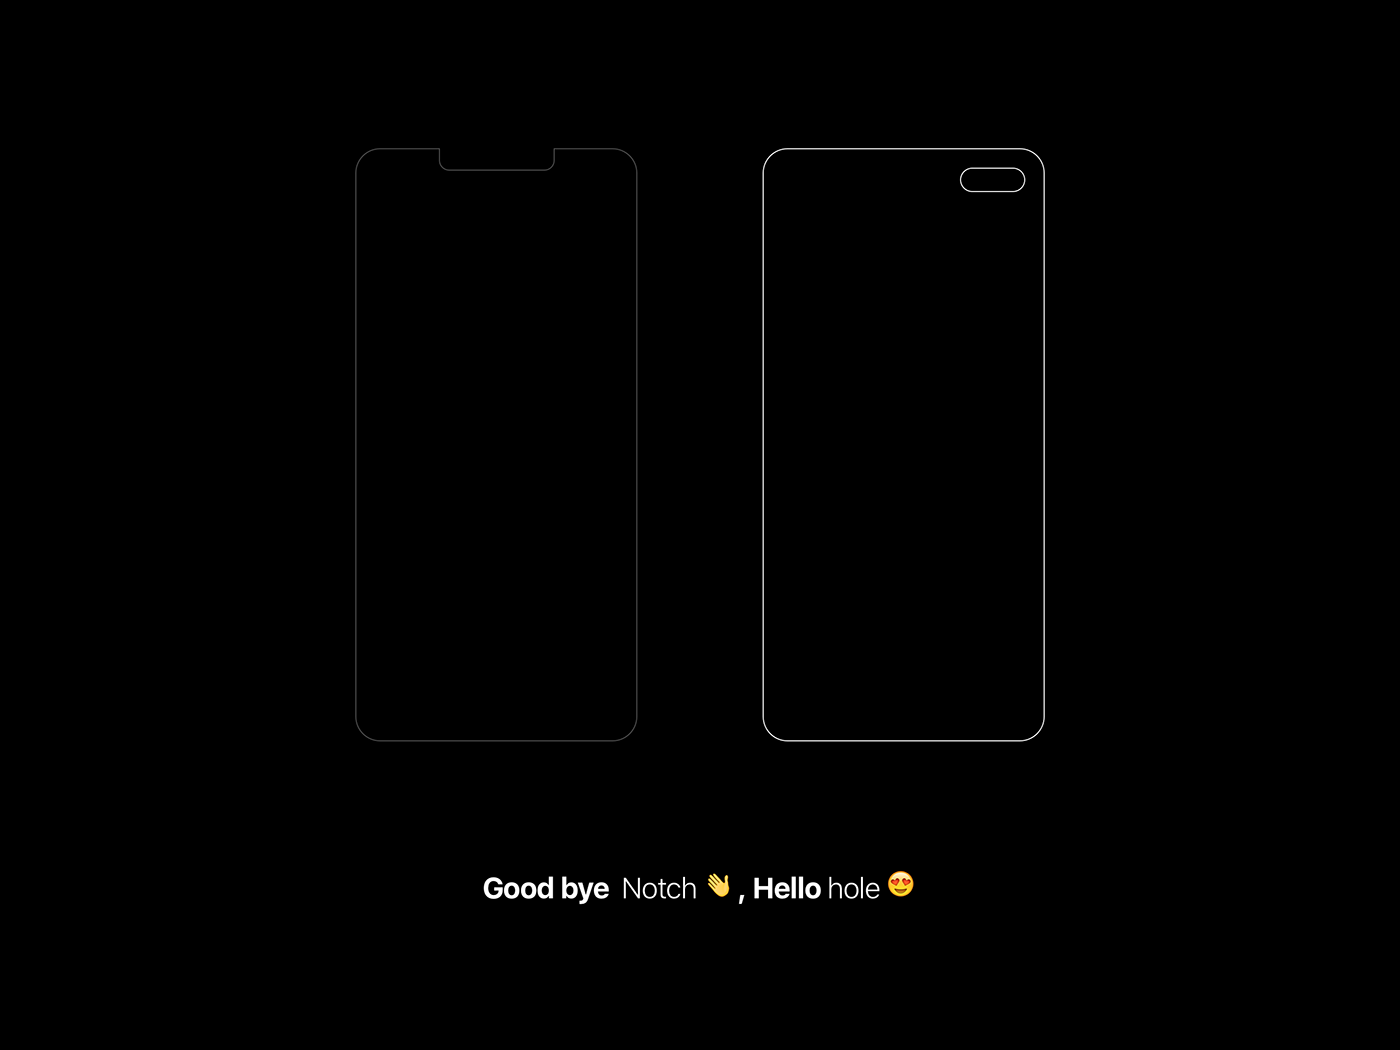 Concept A Notch Less Iphone With A Hole Punch Display And A Minimal Camera Bump